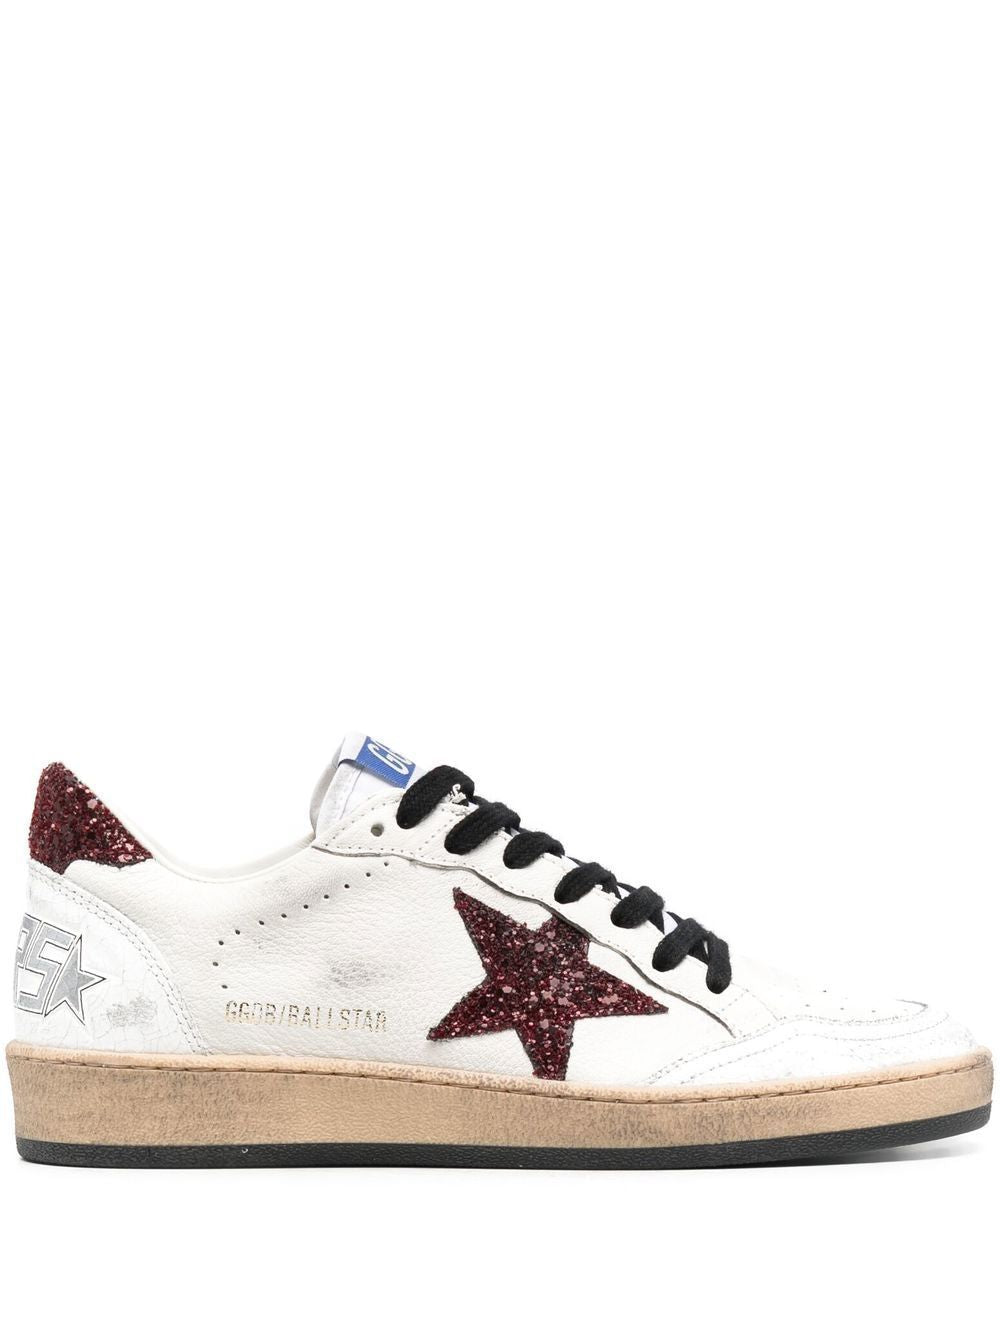 GOLDEN GOOSE White Leather Sneakers for Women FW23